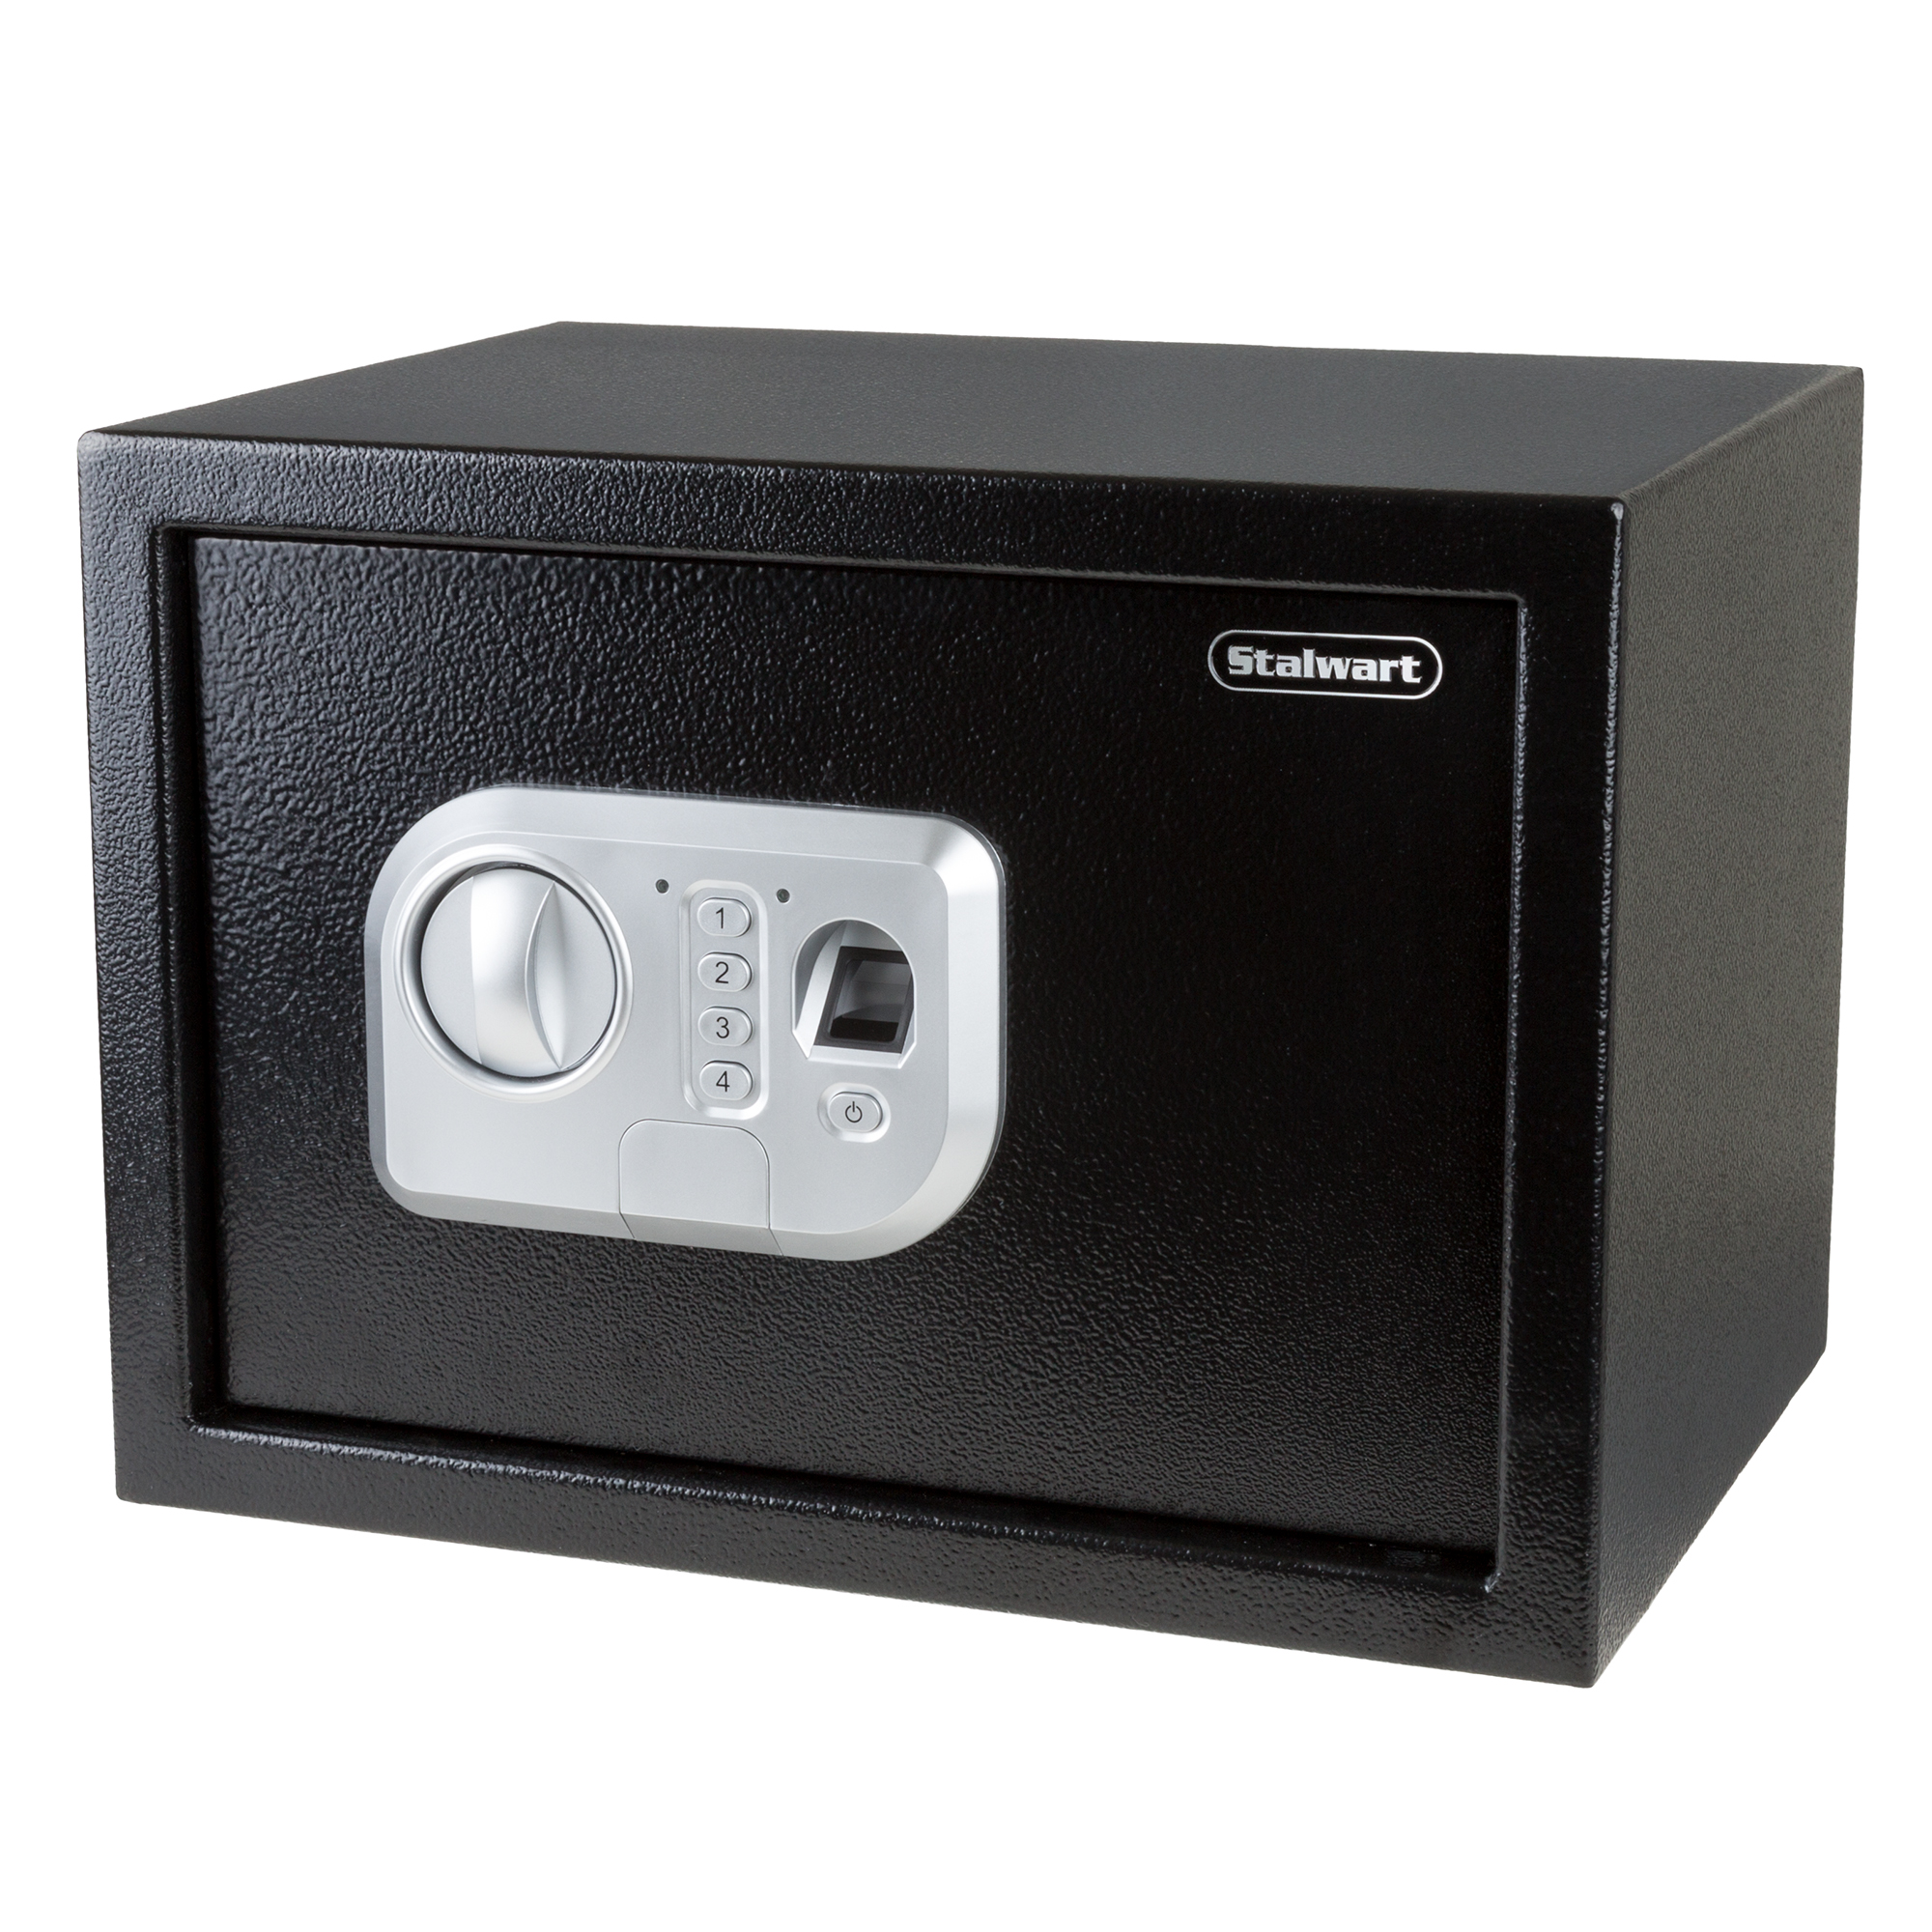 Electronic Safe with Fingerprint Lock for Business or Home ?Key or Biometric Entry Digital Wall or Floor Mount for Jewelry, Cash, and More by Stalwart - image 1 of 7